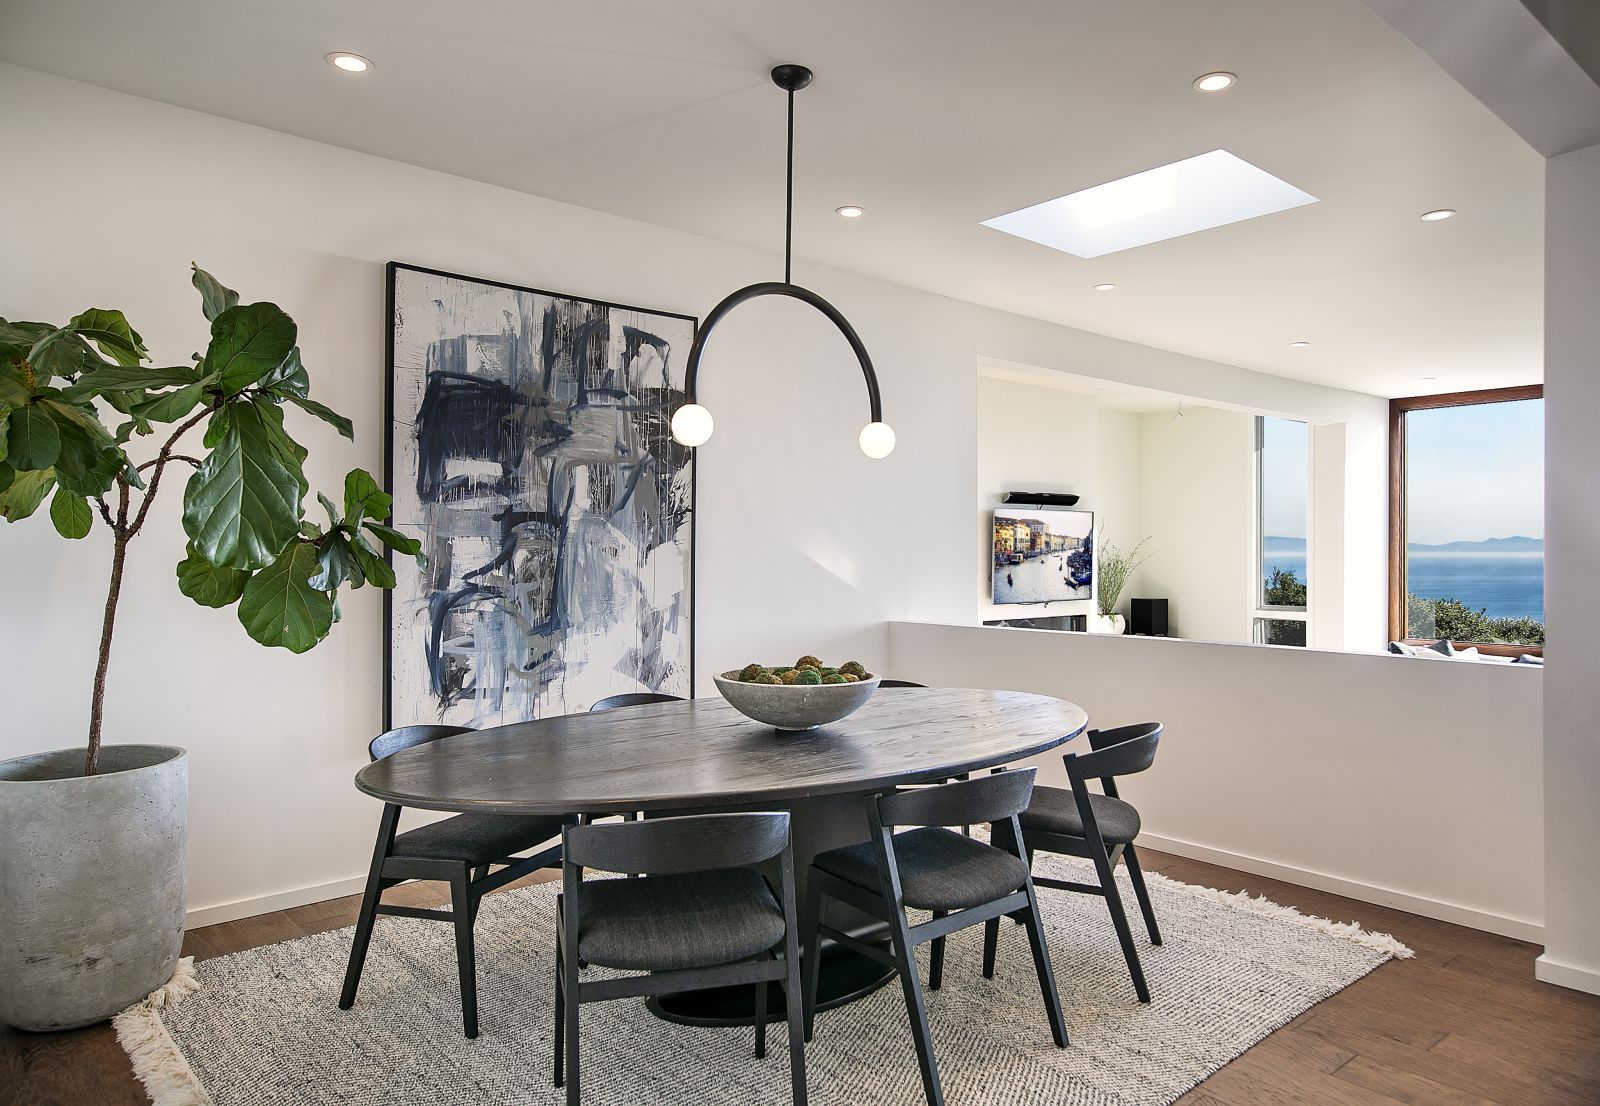 A formal dining room with a modern light fixture above a black table with a breathtaking ocean view.